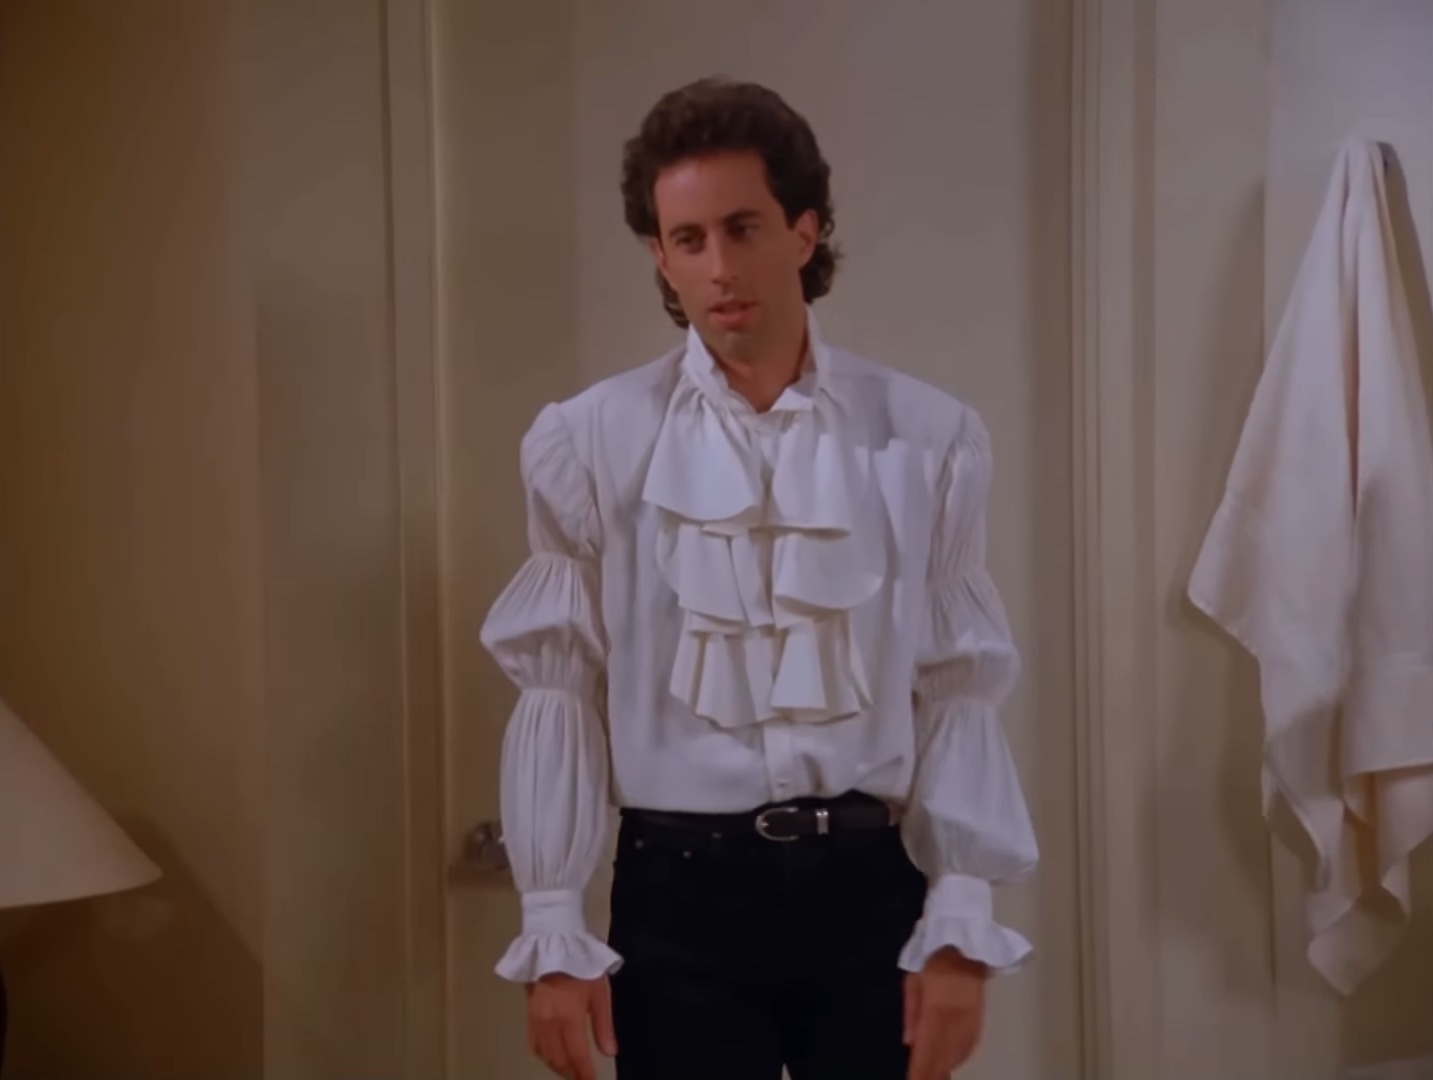 Jerry wearing a puffy shirt in "Seinfeld."